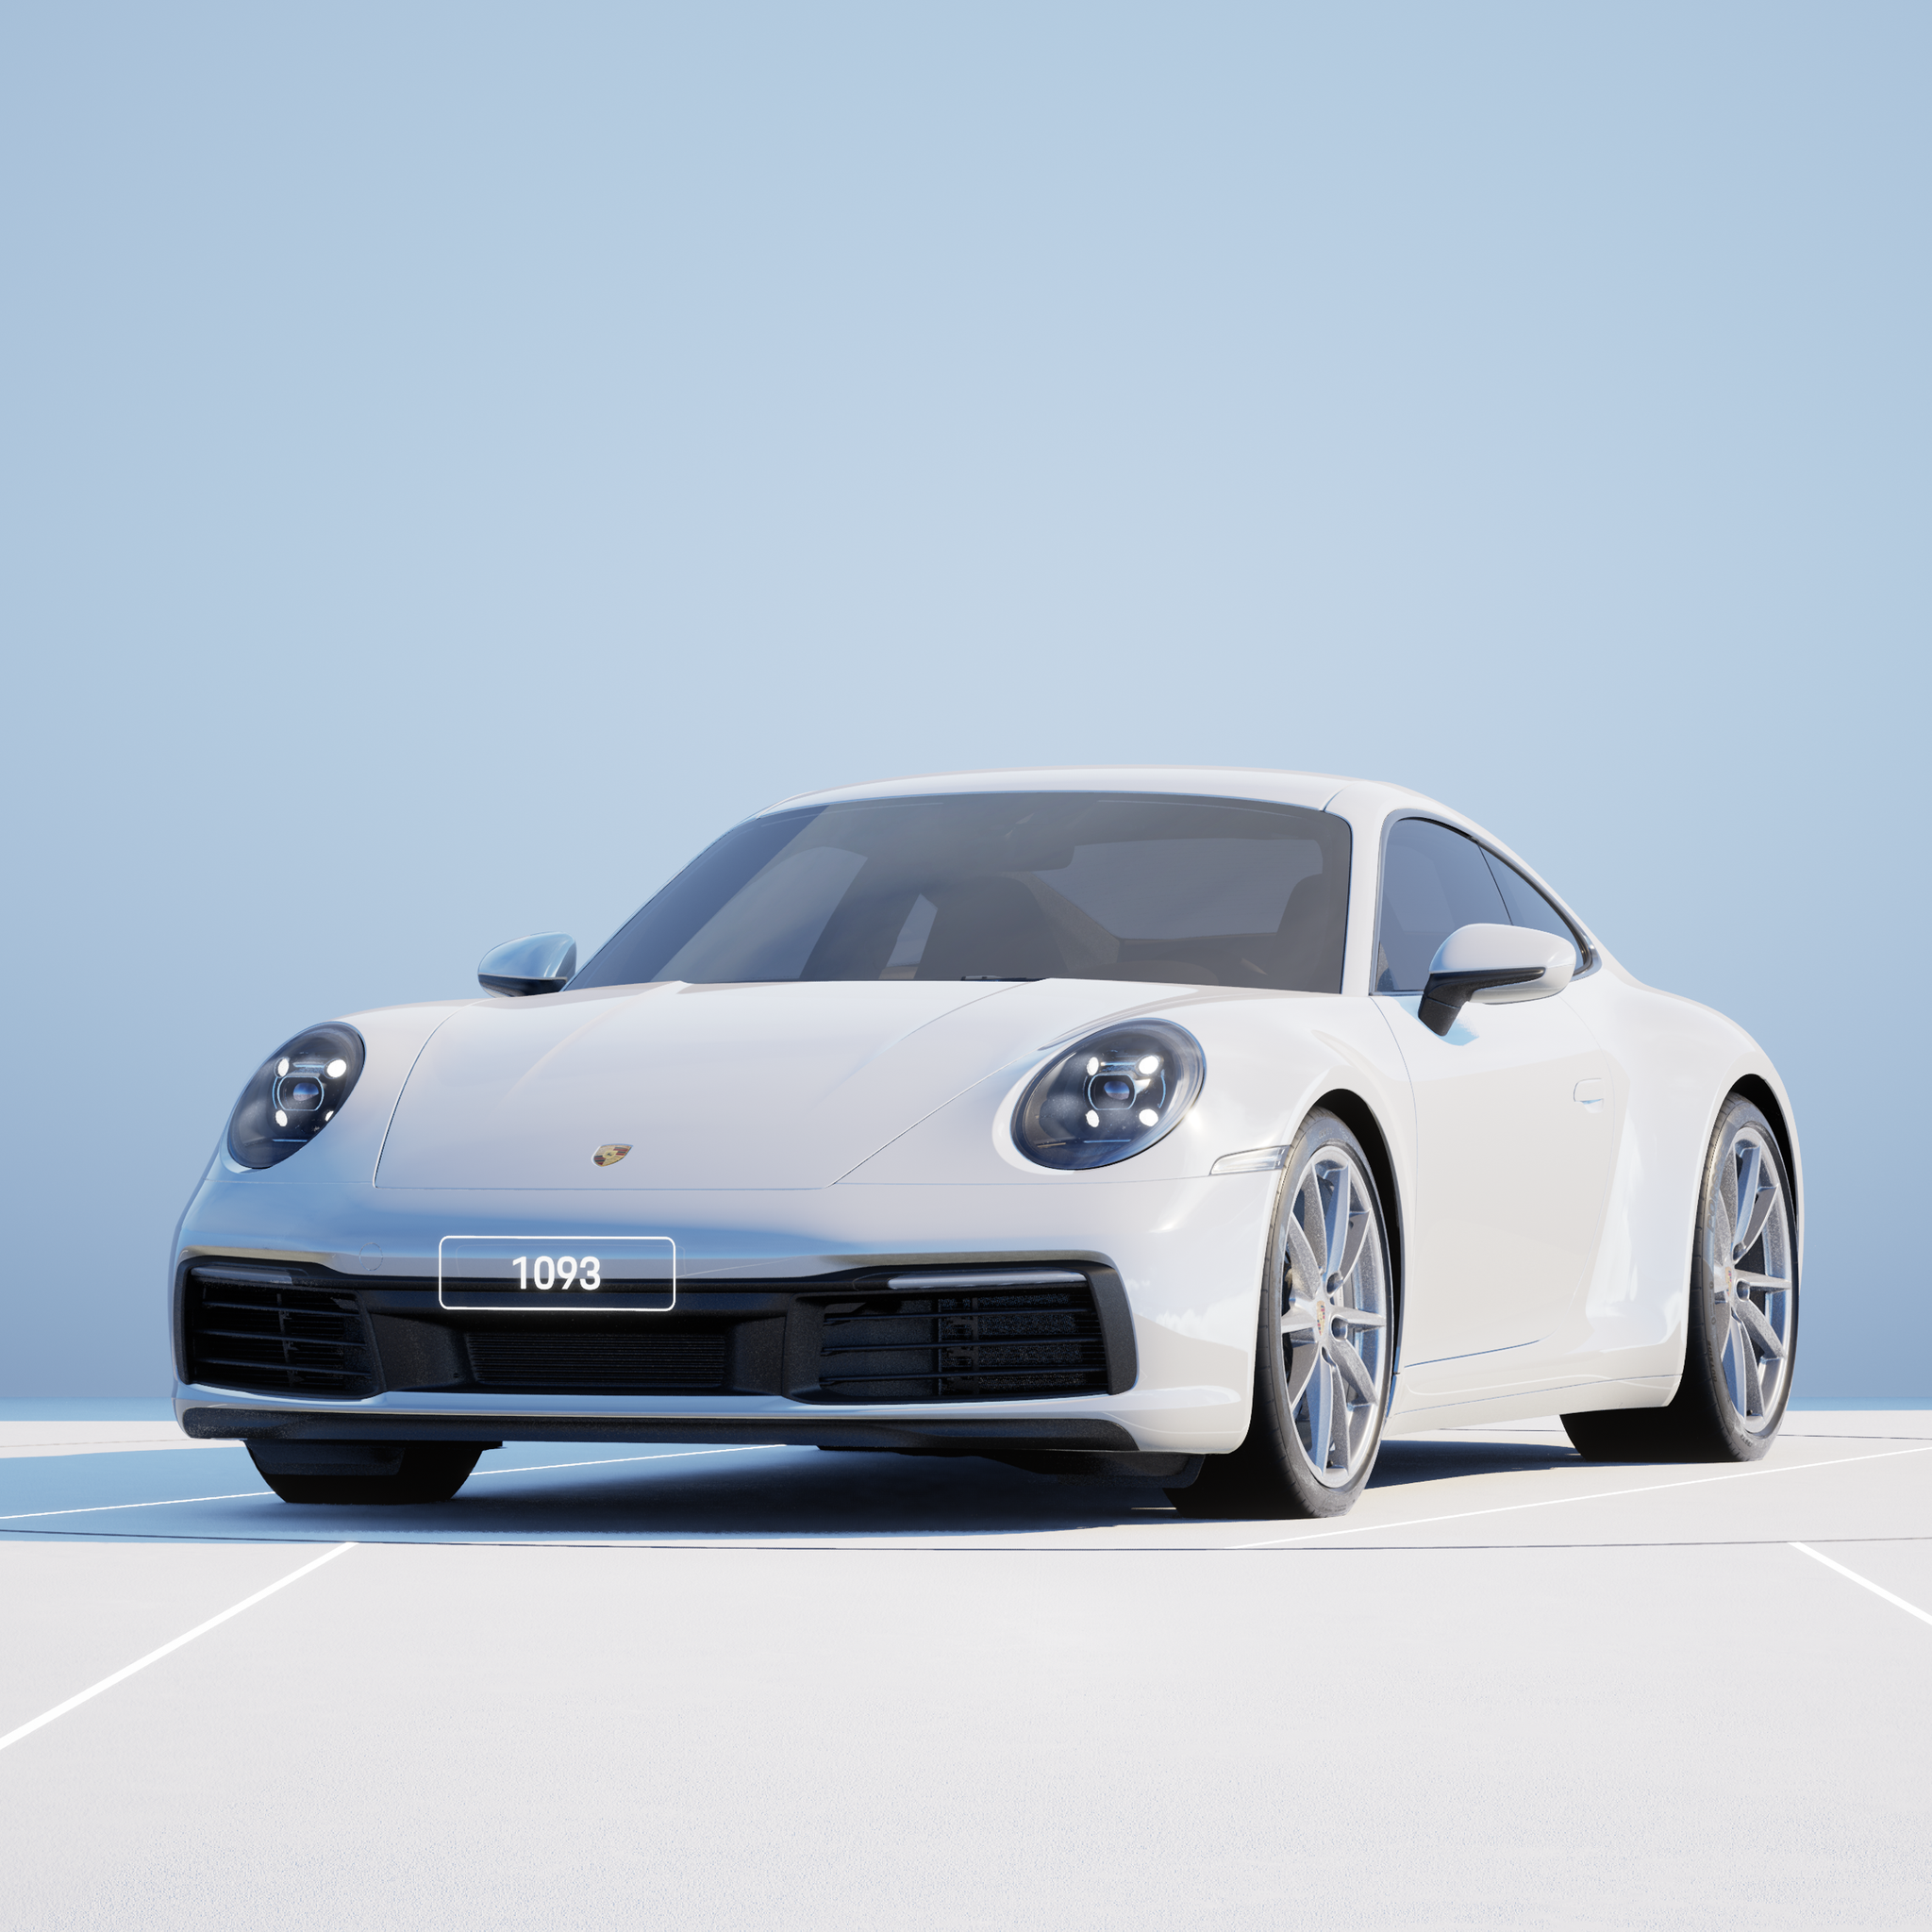 The PORSCHΞ 911 1093 image in phase